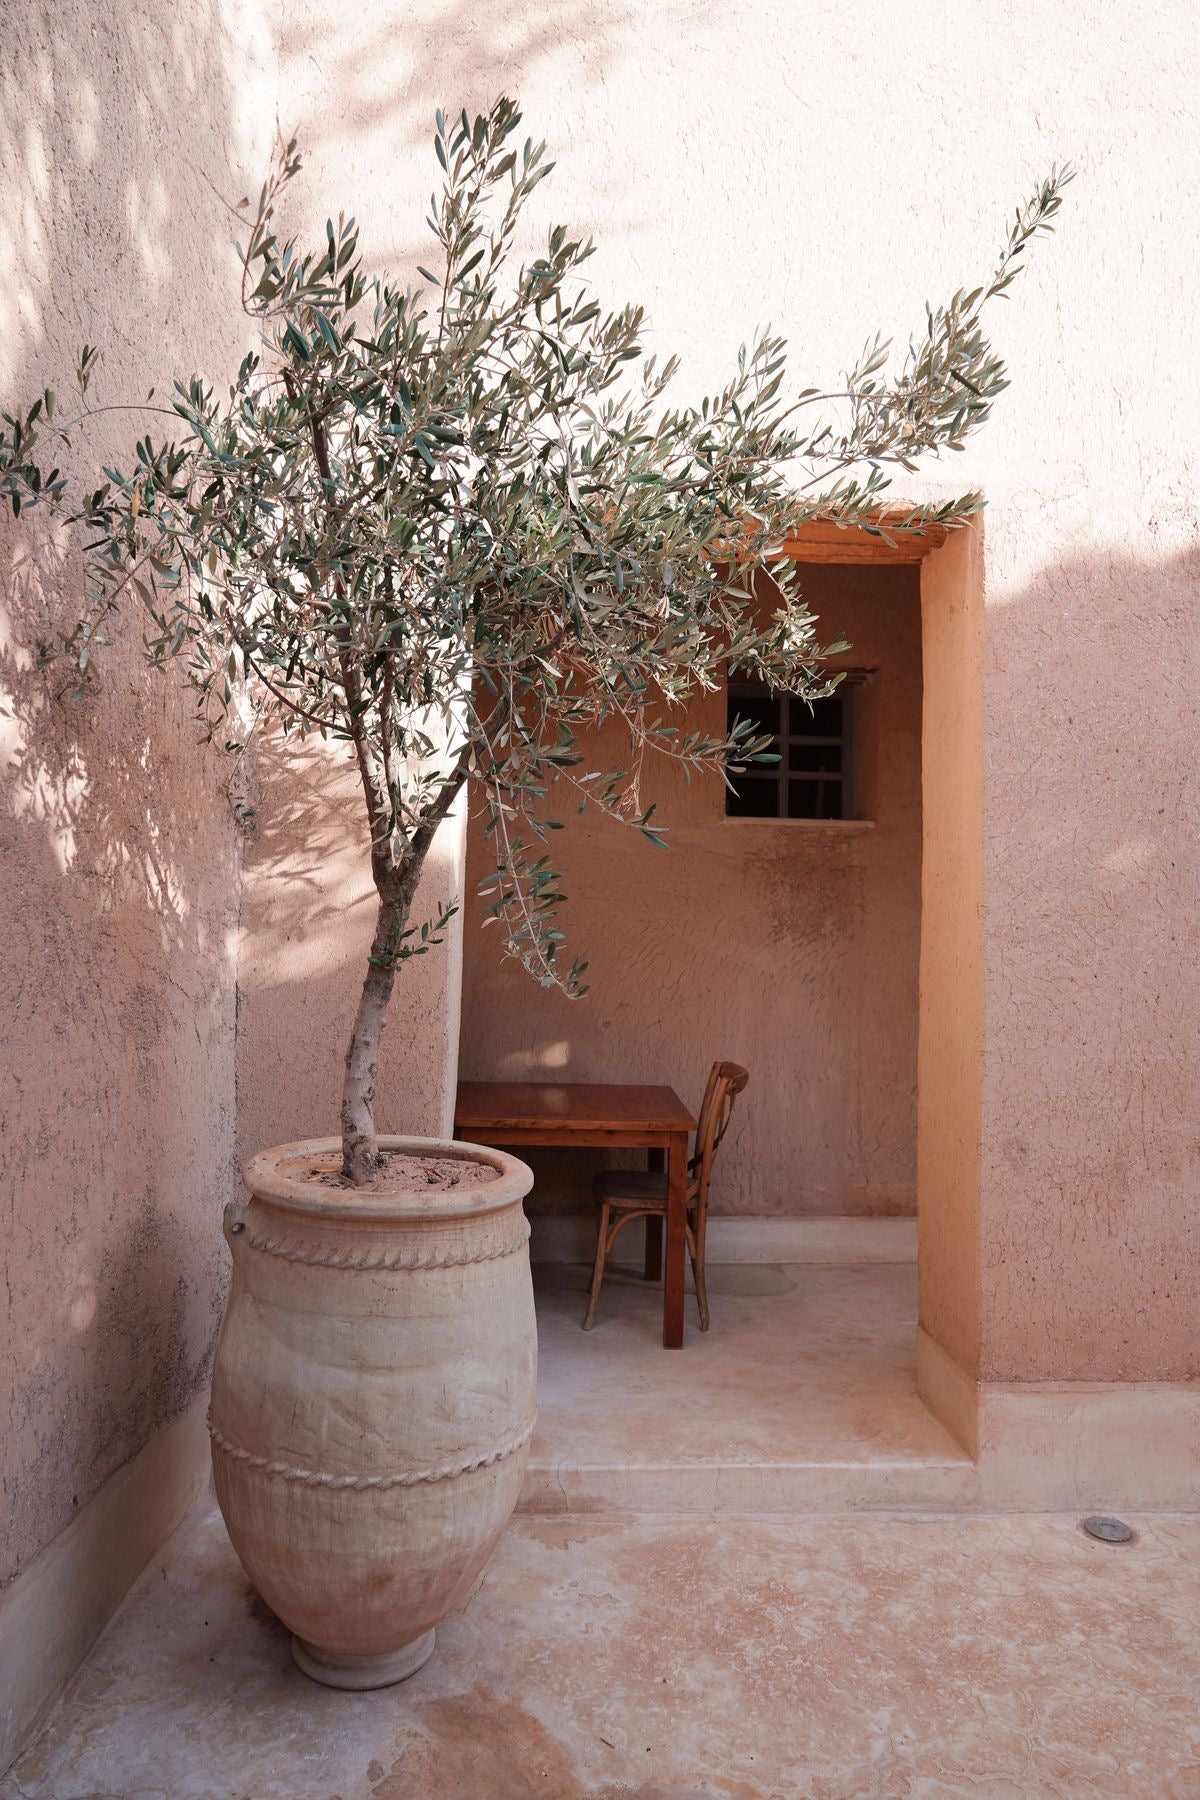 Olive Tree Branched Thin Trunk 2 meters - Plant Studio LLC